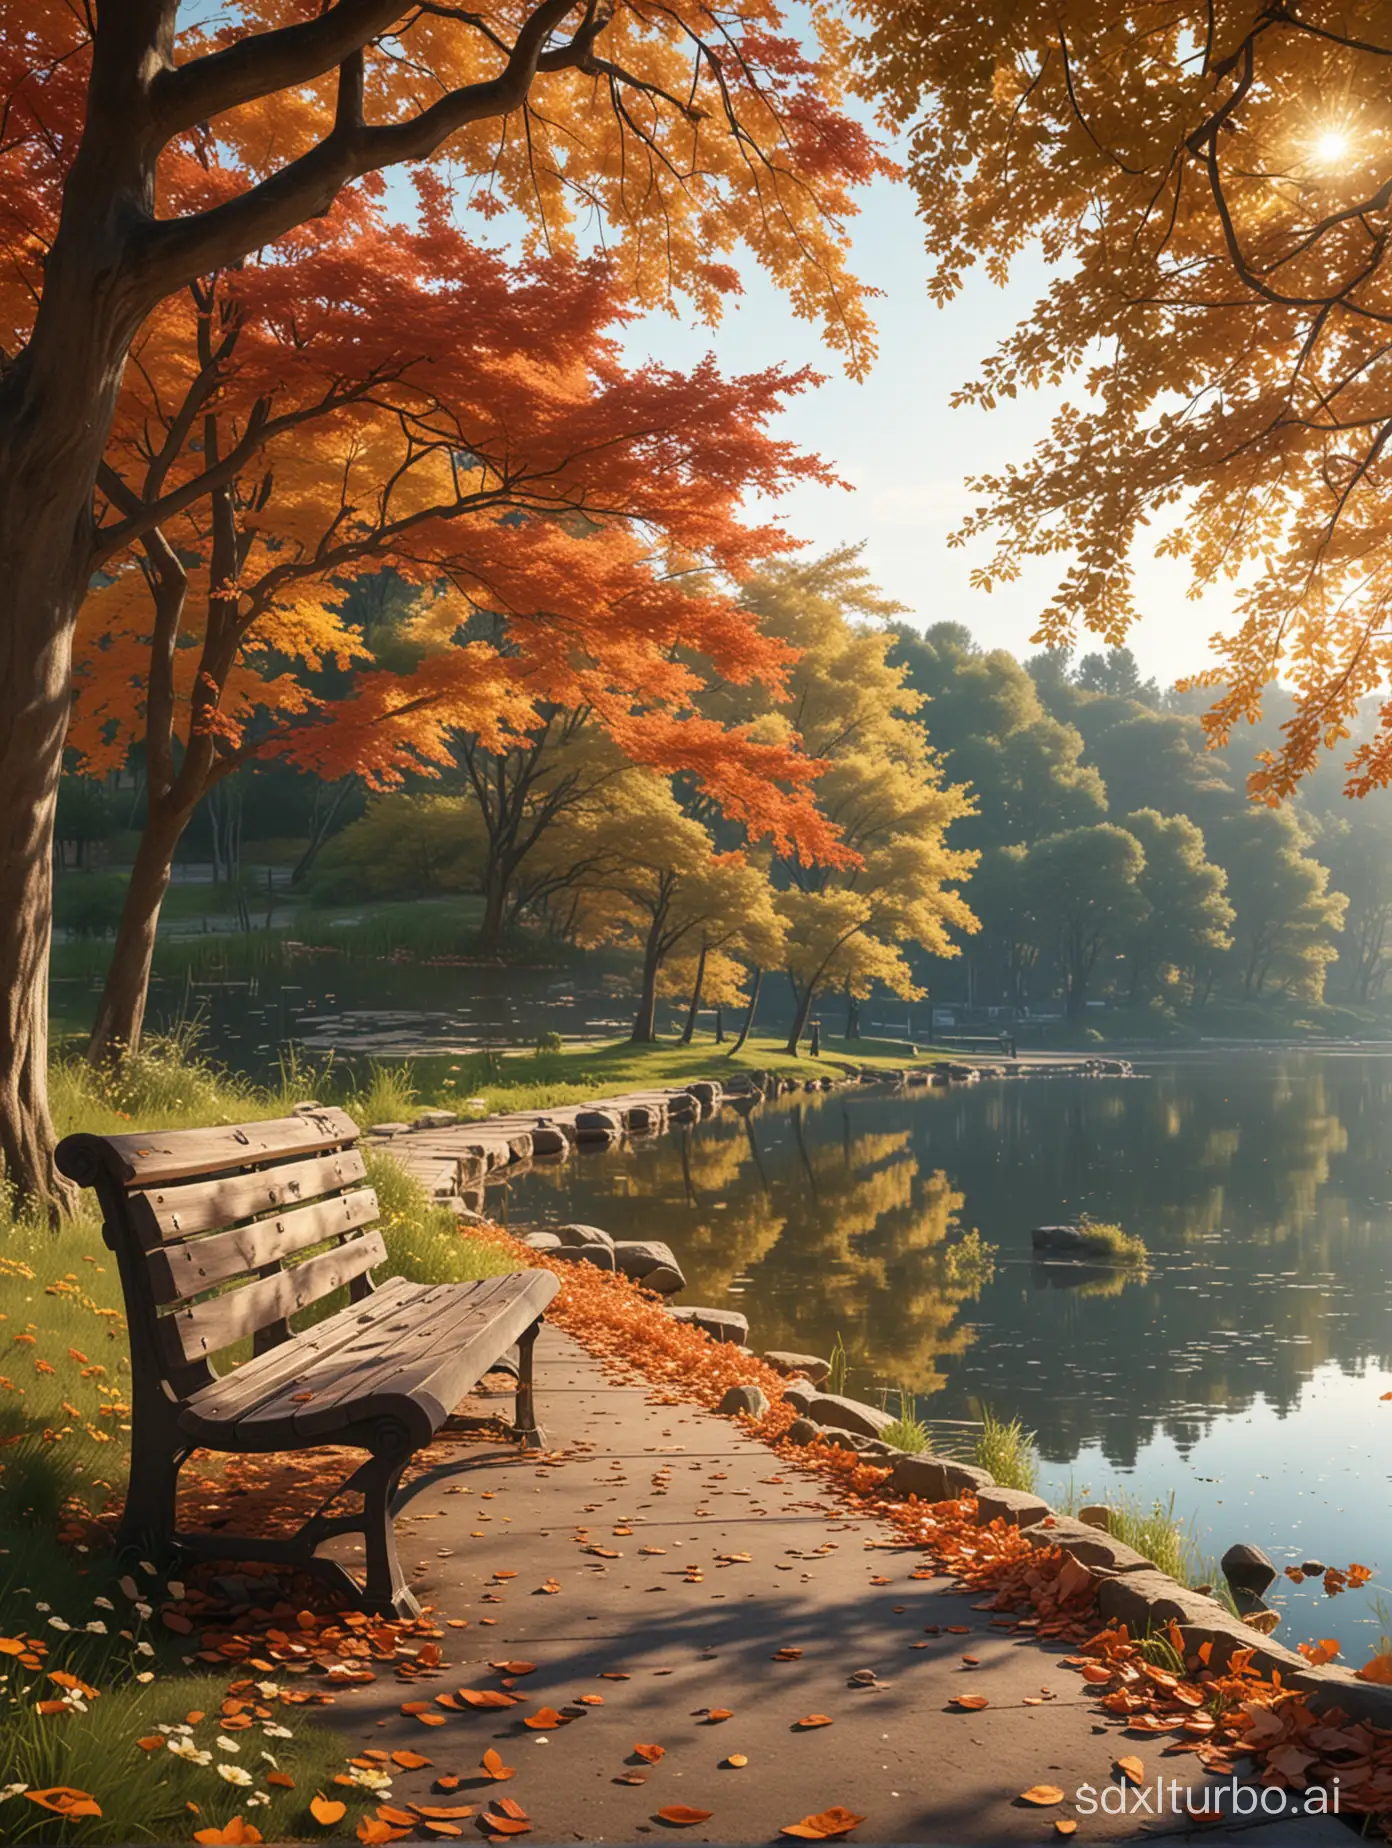 Tranquil-Park-Bench-Scene-with-Flowers-and-Autumn-Foliage-in-Dappled-Light